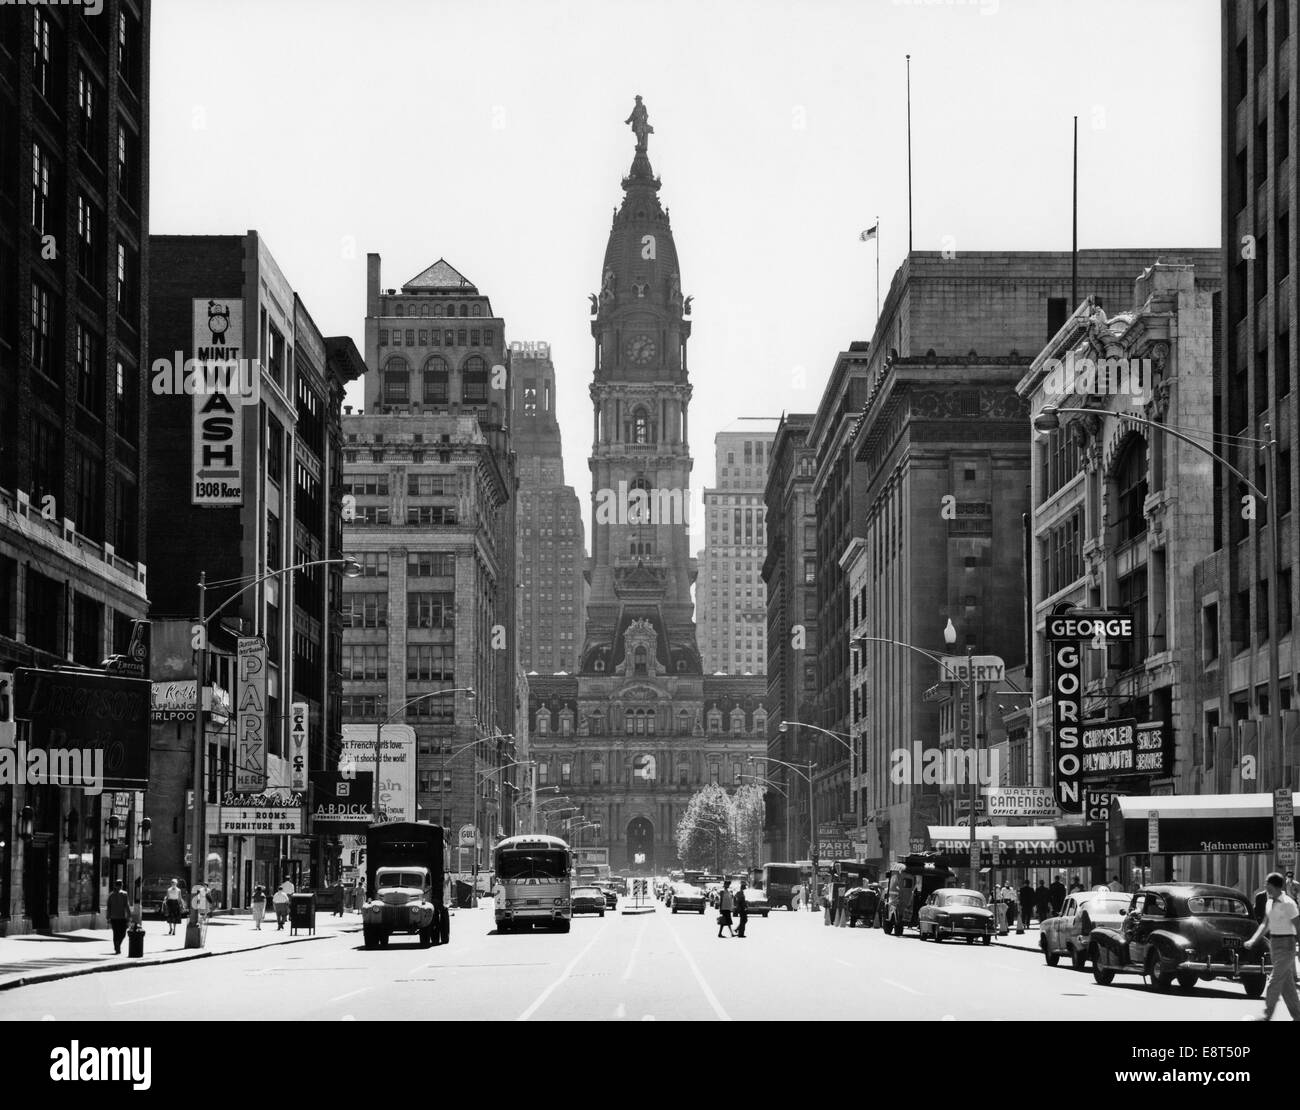 1950s DOWNTOWN PHILADELPHIA PA USA LOOKING SOUTH DOWN NORTH BROAD STREET AT CITY HALL Stock Photo